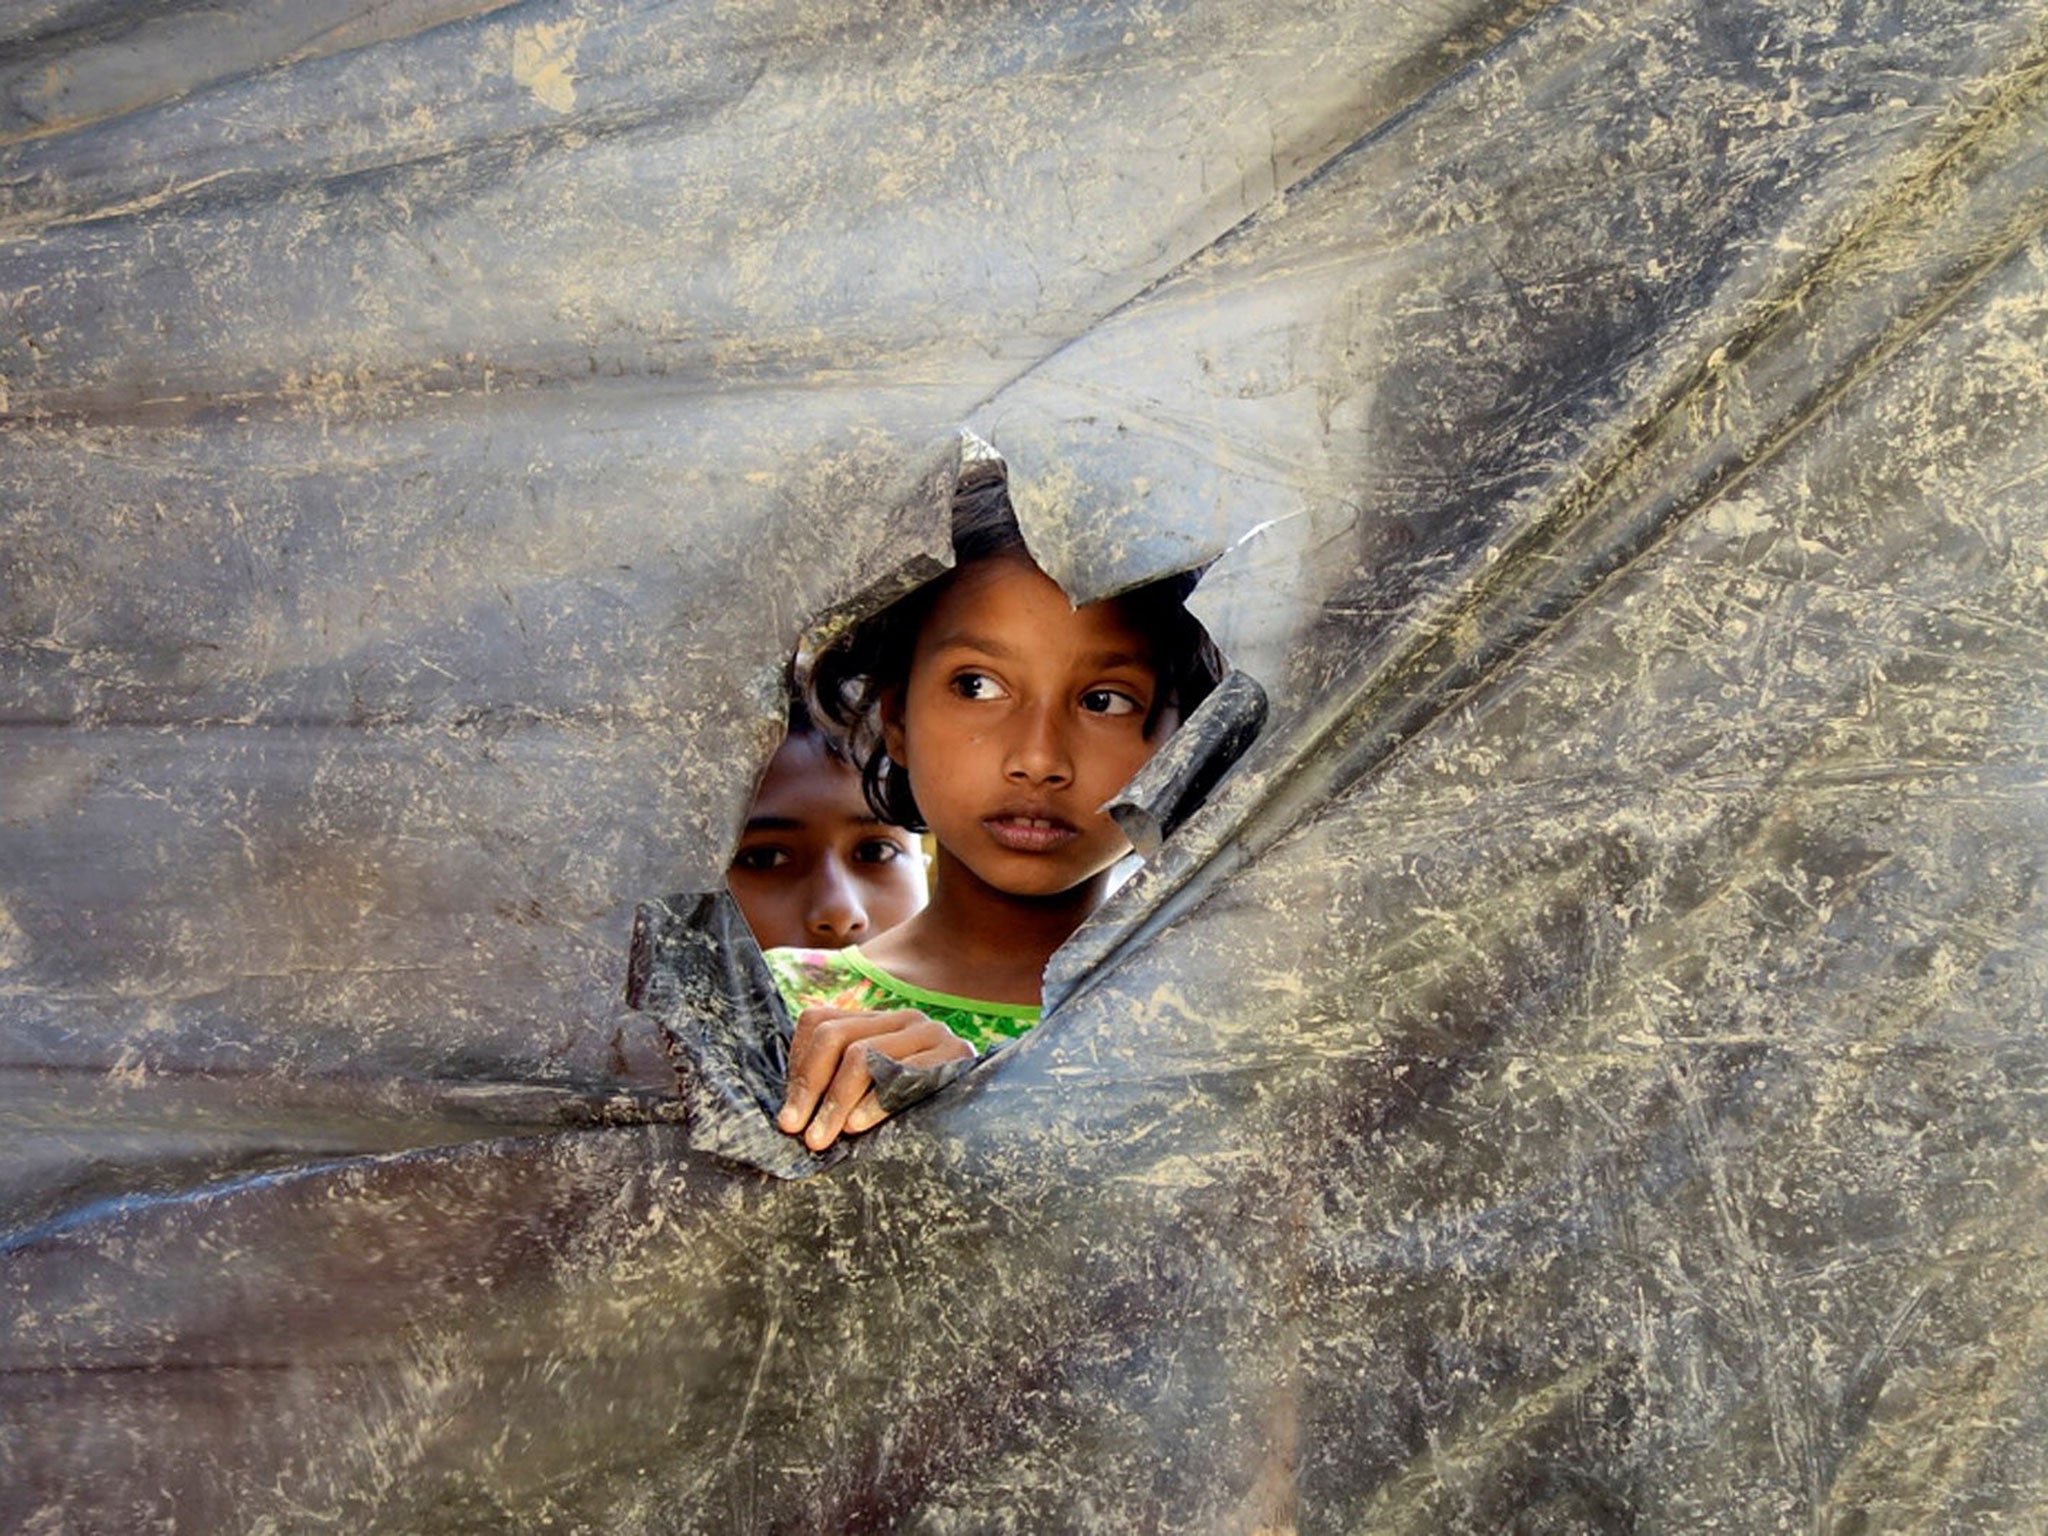 A Rohingya refugee girl peeks through a hole made in a plastic wall dividing the shelters at Balu Kali Refugee Camp in Cox's Bazar, Bangladesh, 28 February, 2017